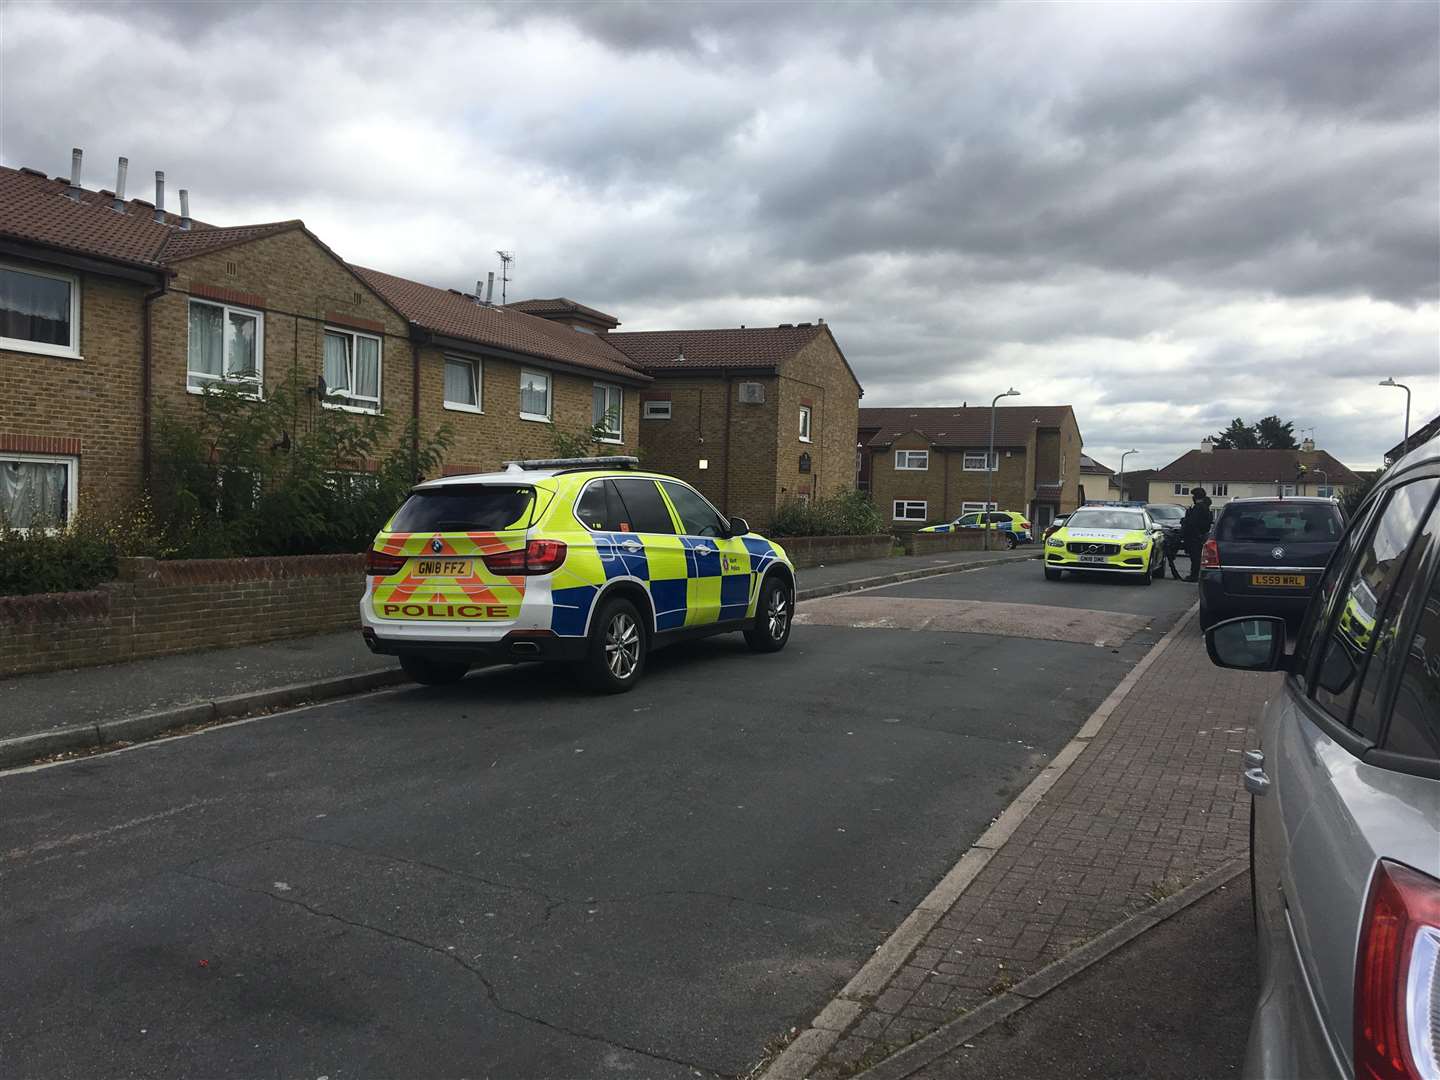 Armed police were pictured in York Road, Gravesend. Picture: KMG. (4533180)